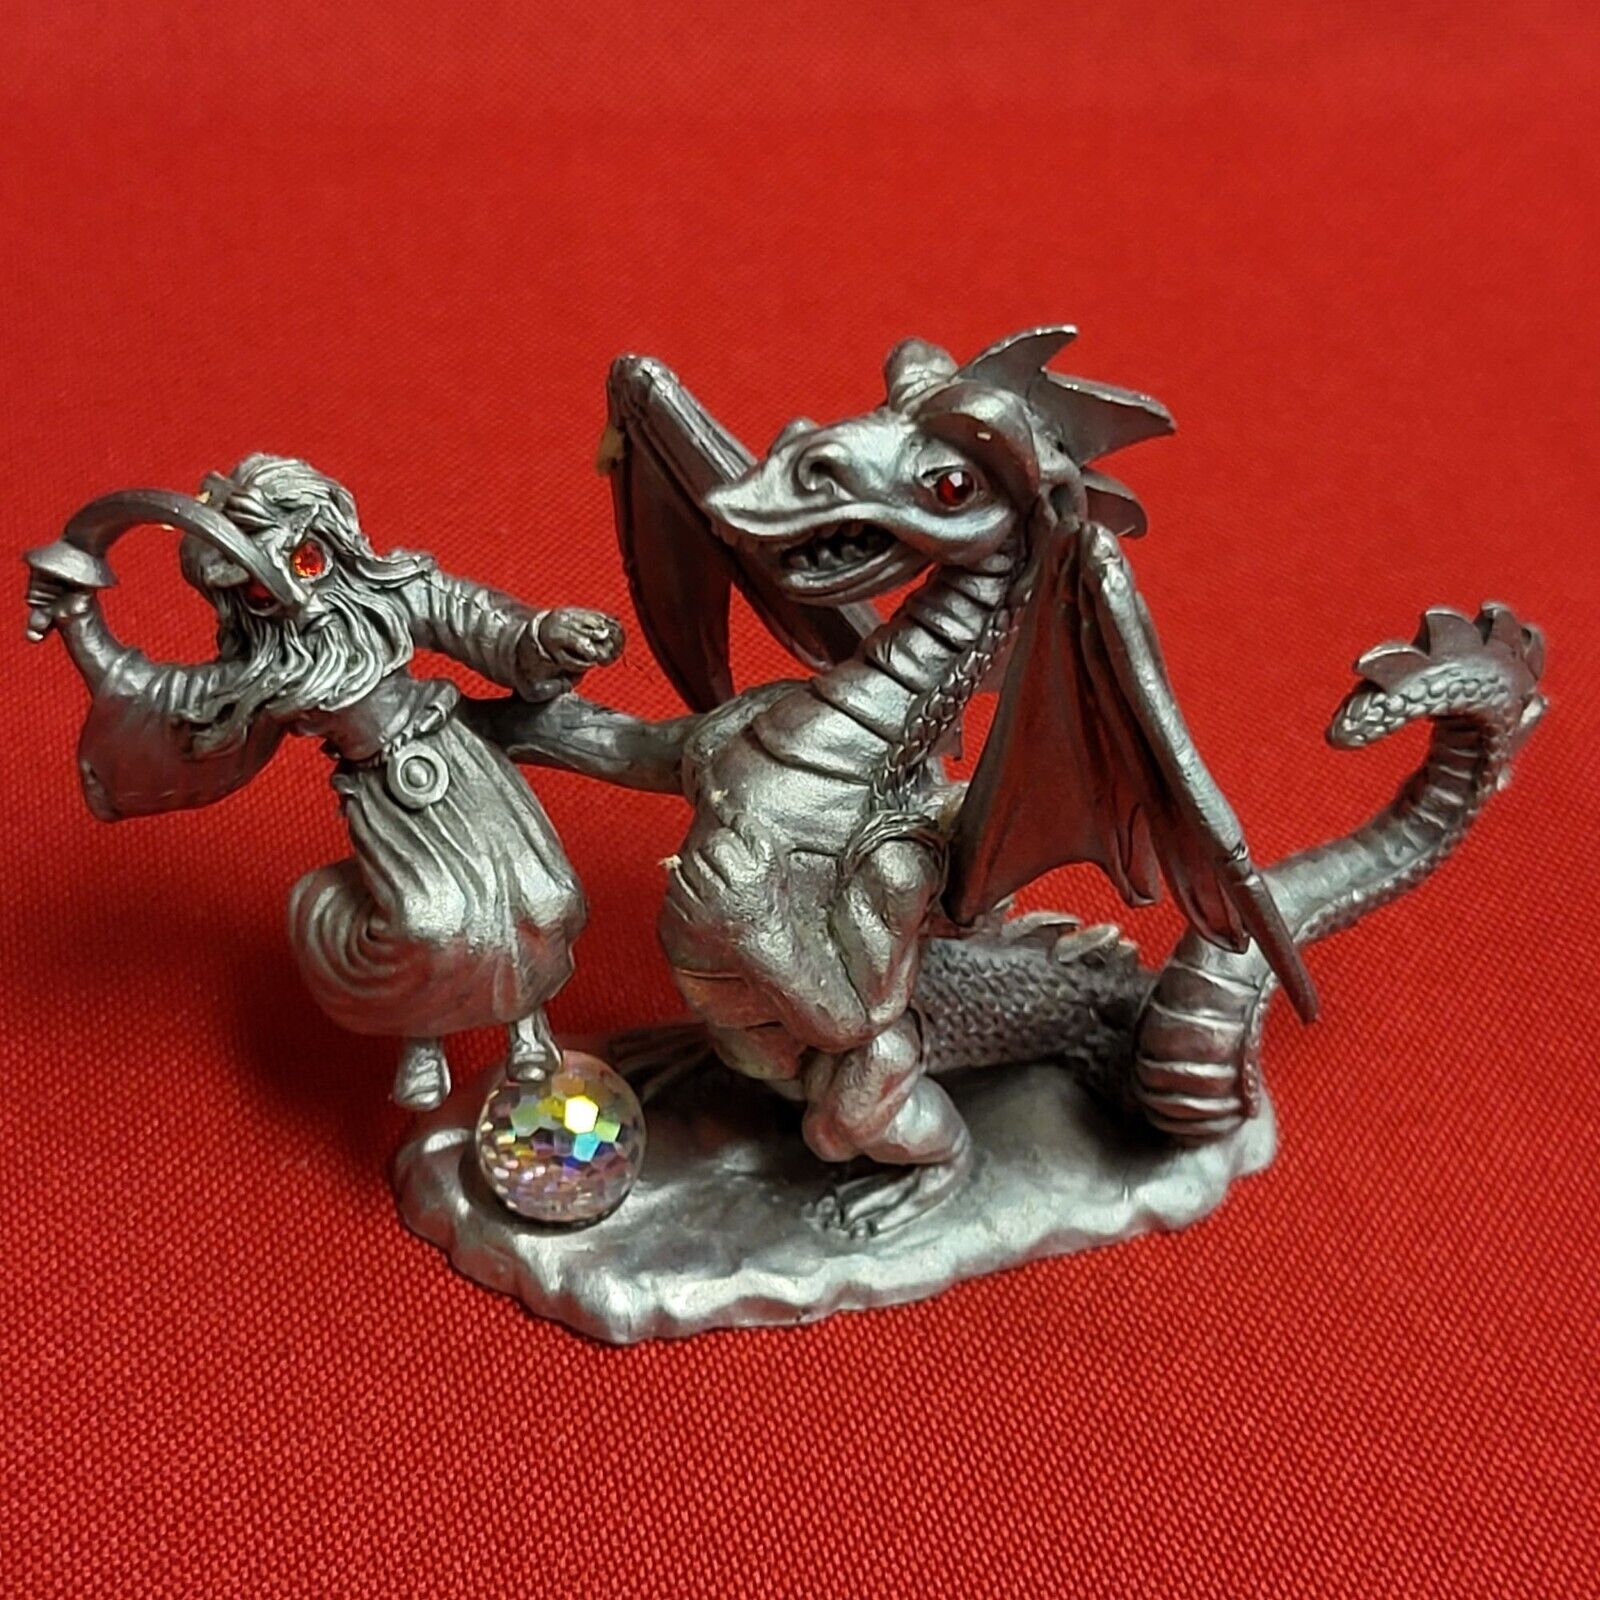 VTG Spoontiques CMR610 Pewter Miniature Dragon and Slayer with Swarovski Crystal